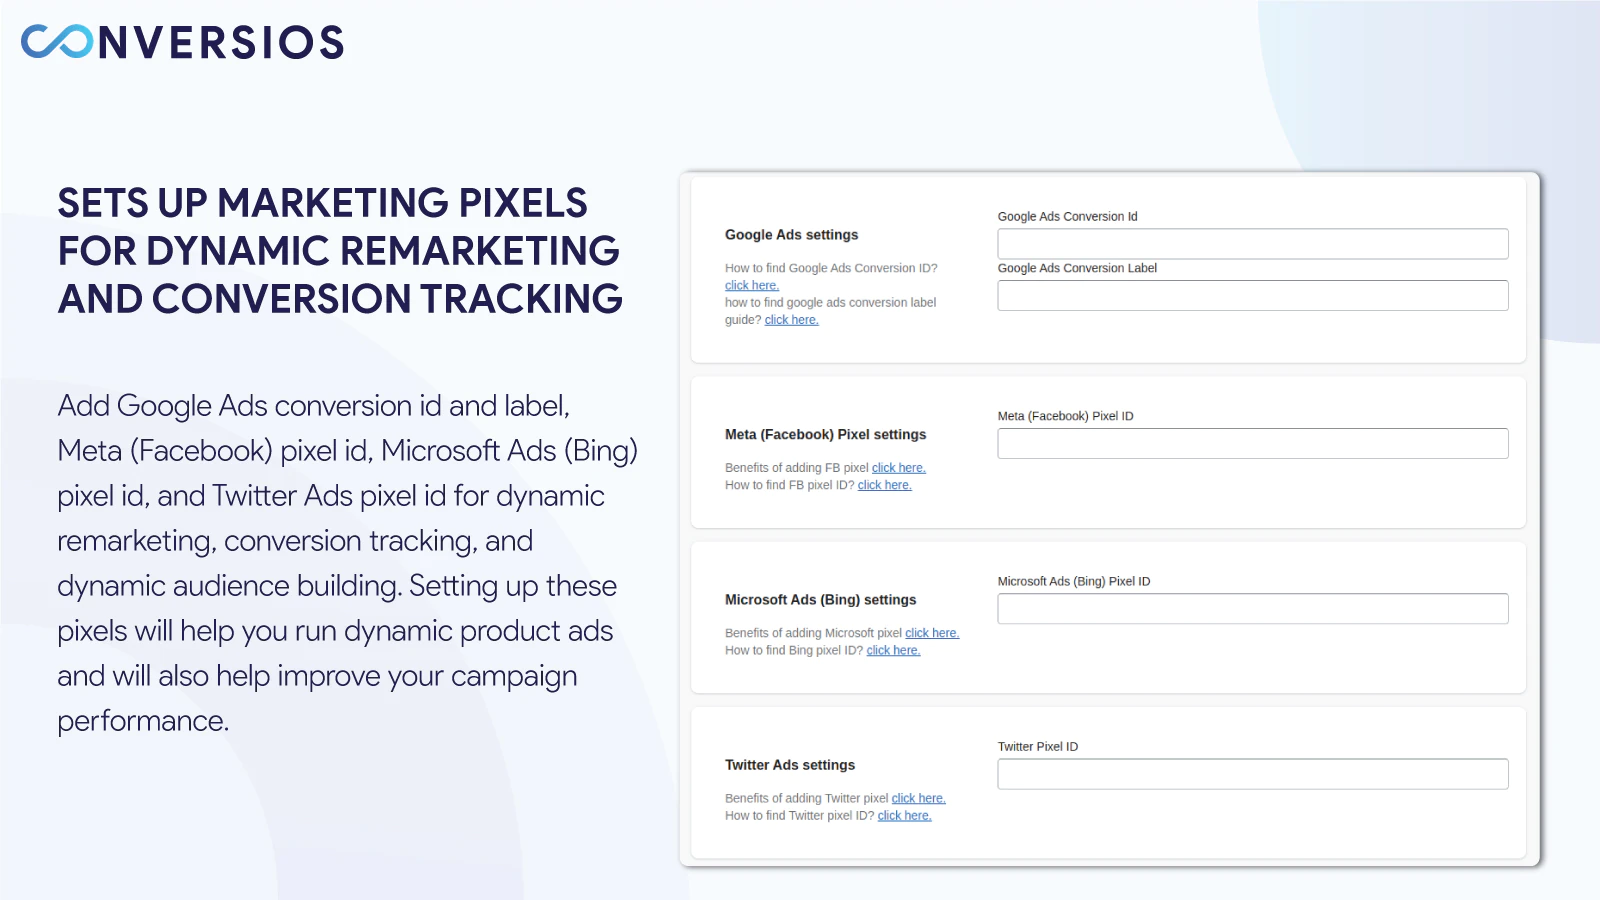 Do conversion tracking and dynamic remarketing by installing marketing pixels like Facebook Pixel, Bing Pixel, and Twitter Pixel